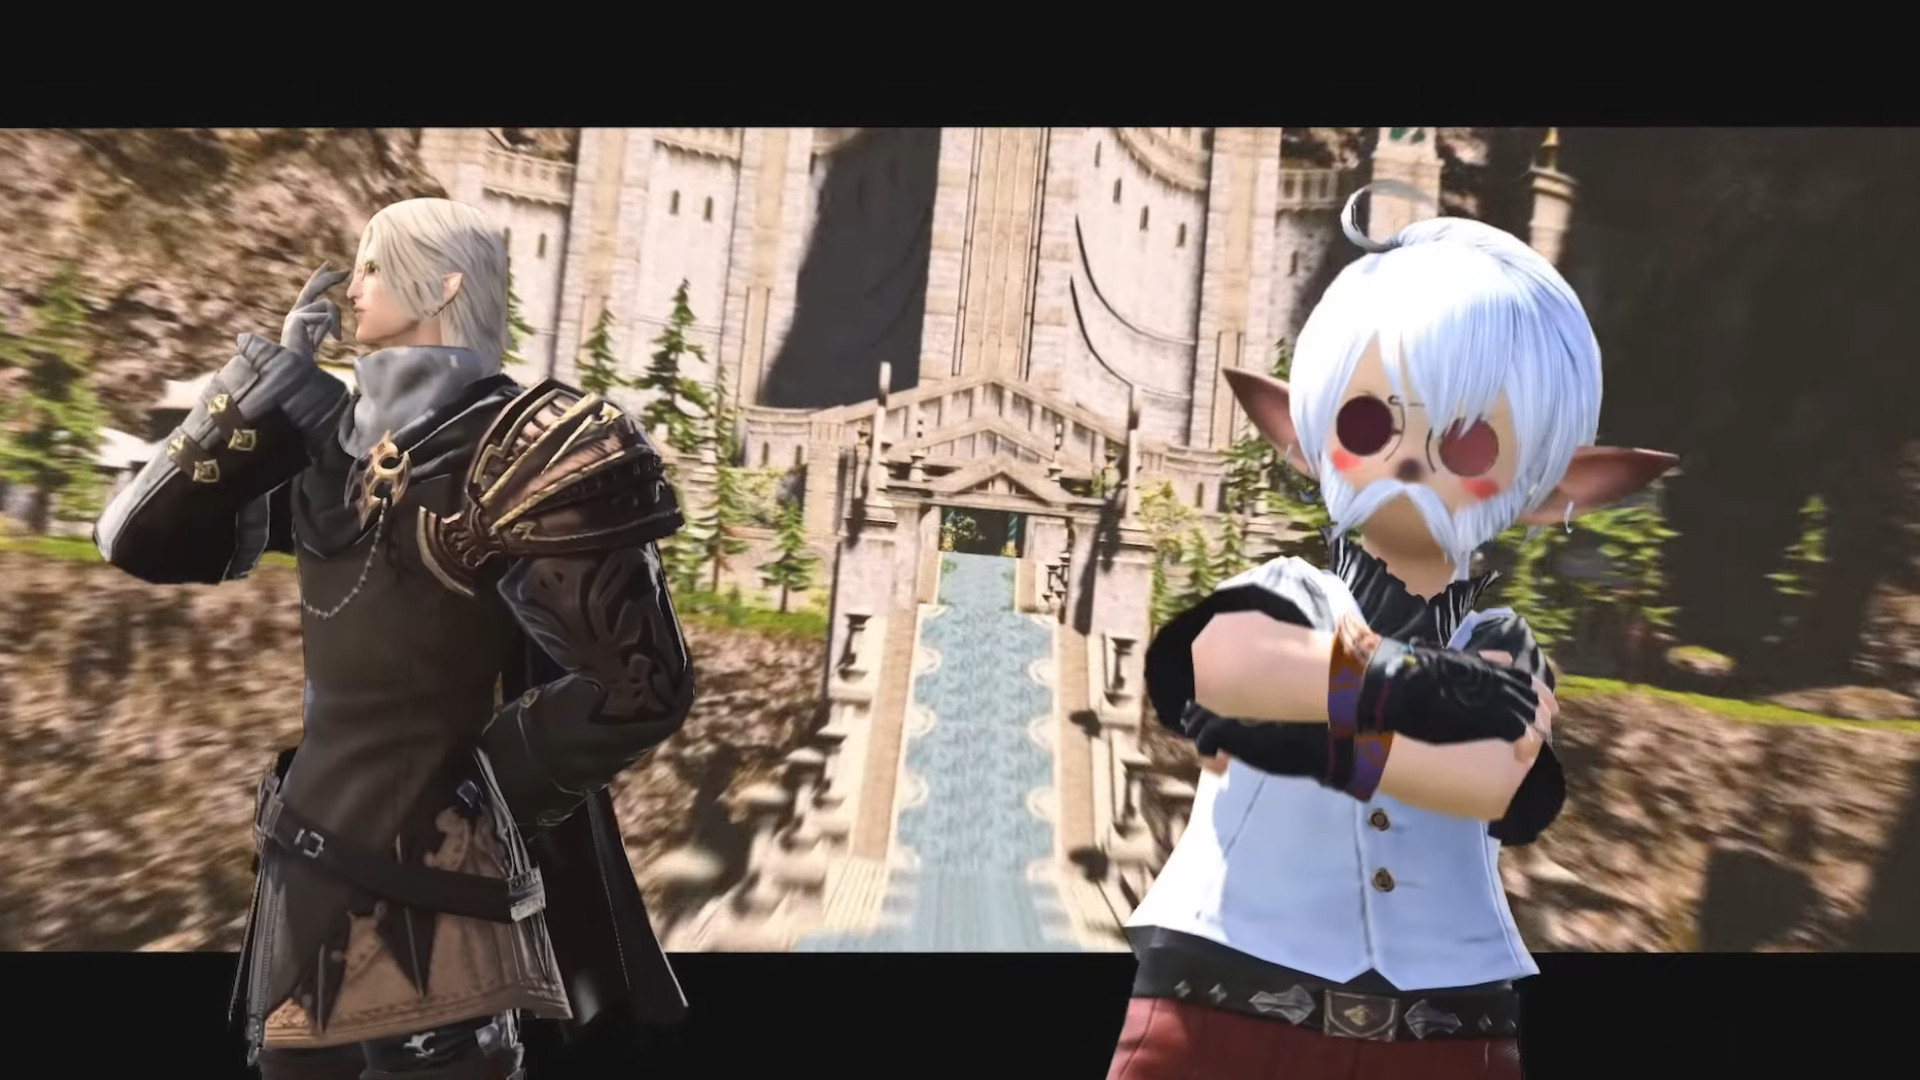 This Final Fantasy XIV anime intro is the best fake anime OP I’ve ever seen